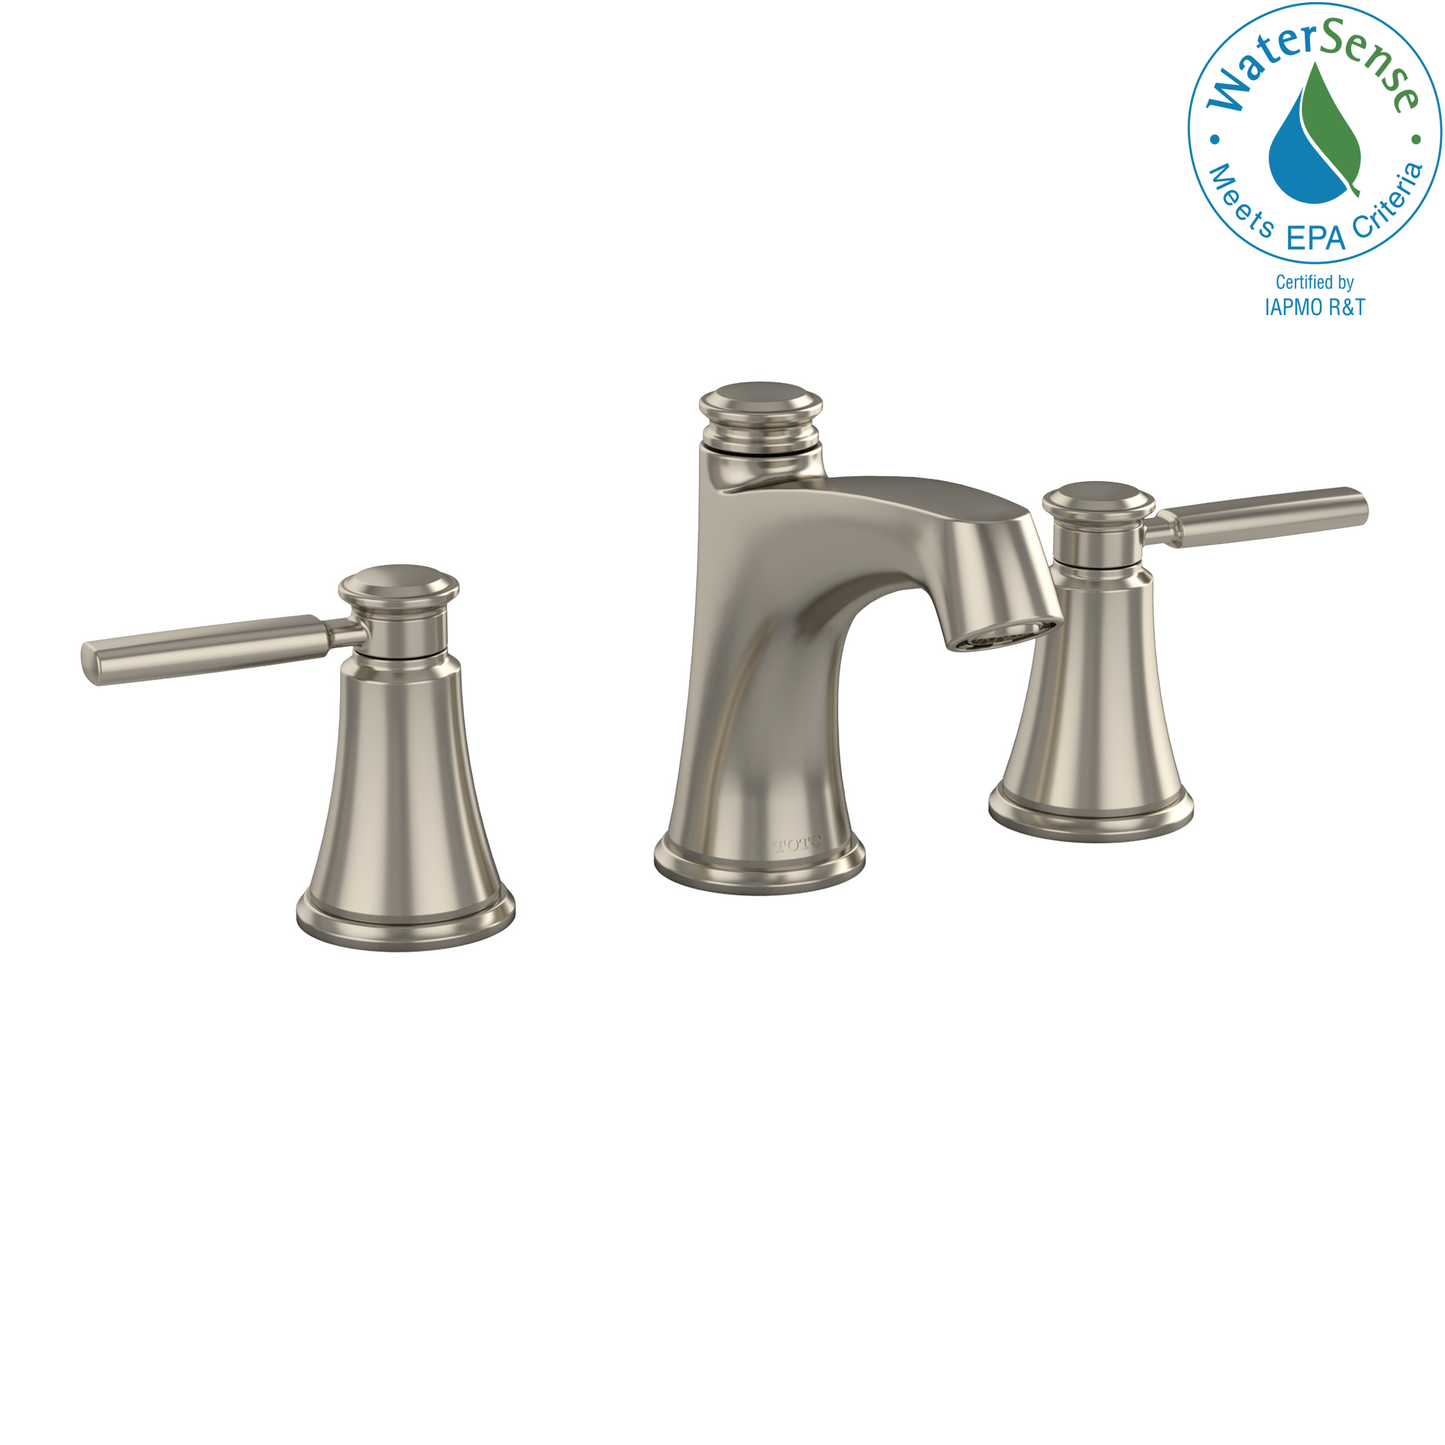 Toto TL211DD12#CP - Keane Two Handle Widespread 1.2 GPM Bathroom Sink Faucet, Brushed Nickel